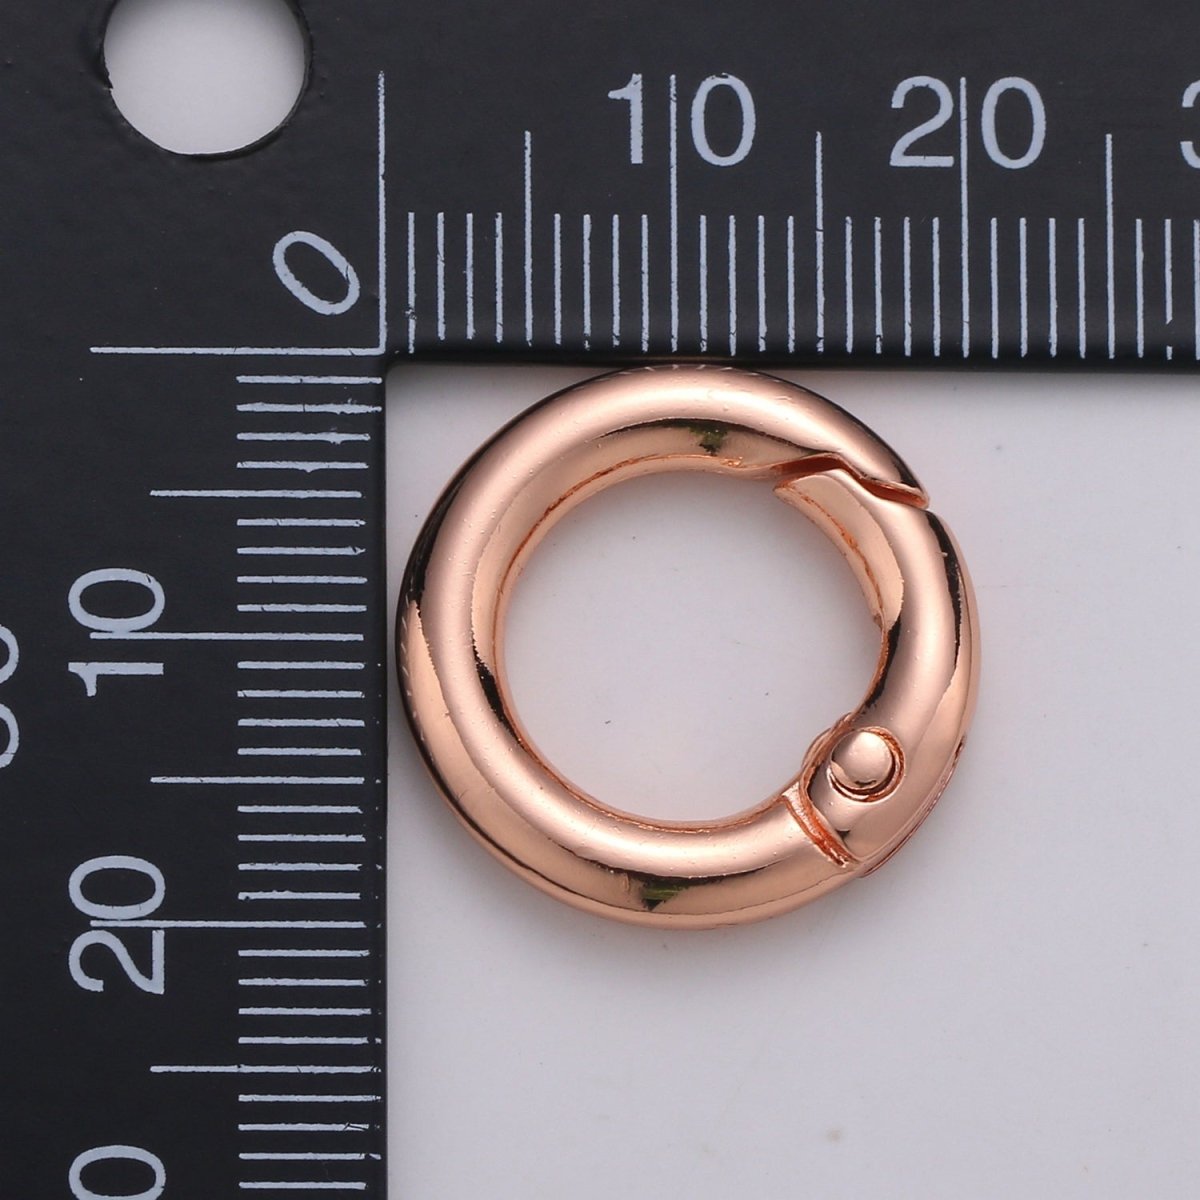 Chunky Gold Spring Gate Ring, Push Gate ring, 20mm Round Ring, Charm Holder 24K Gold Filled Clasp for Link Chain Connector L-032~L035 L084 L085 - DLUXCA